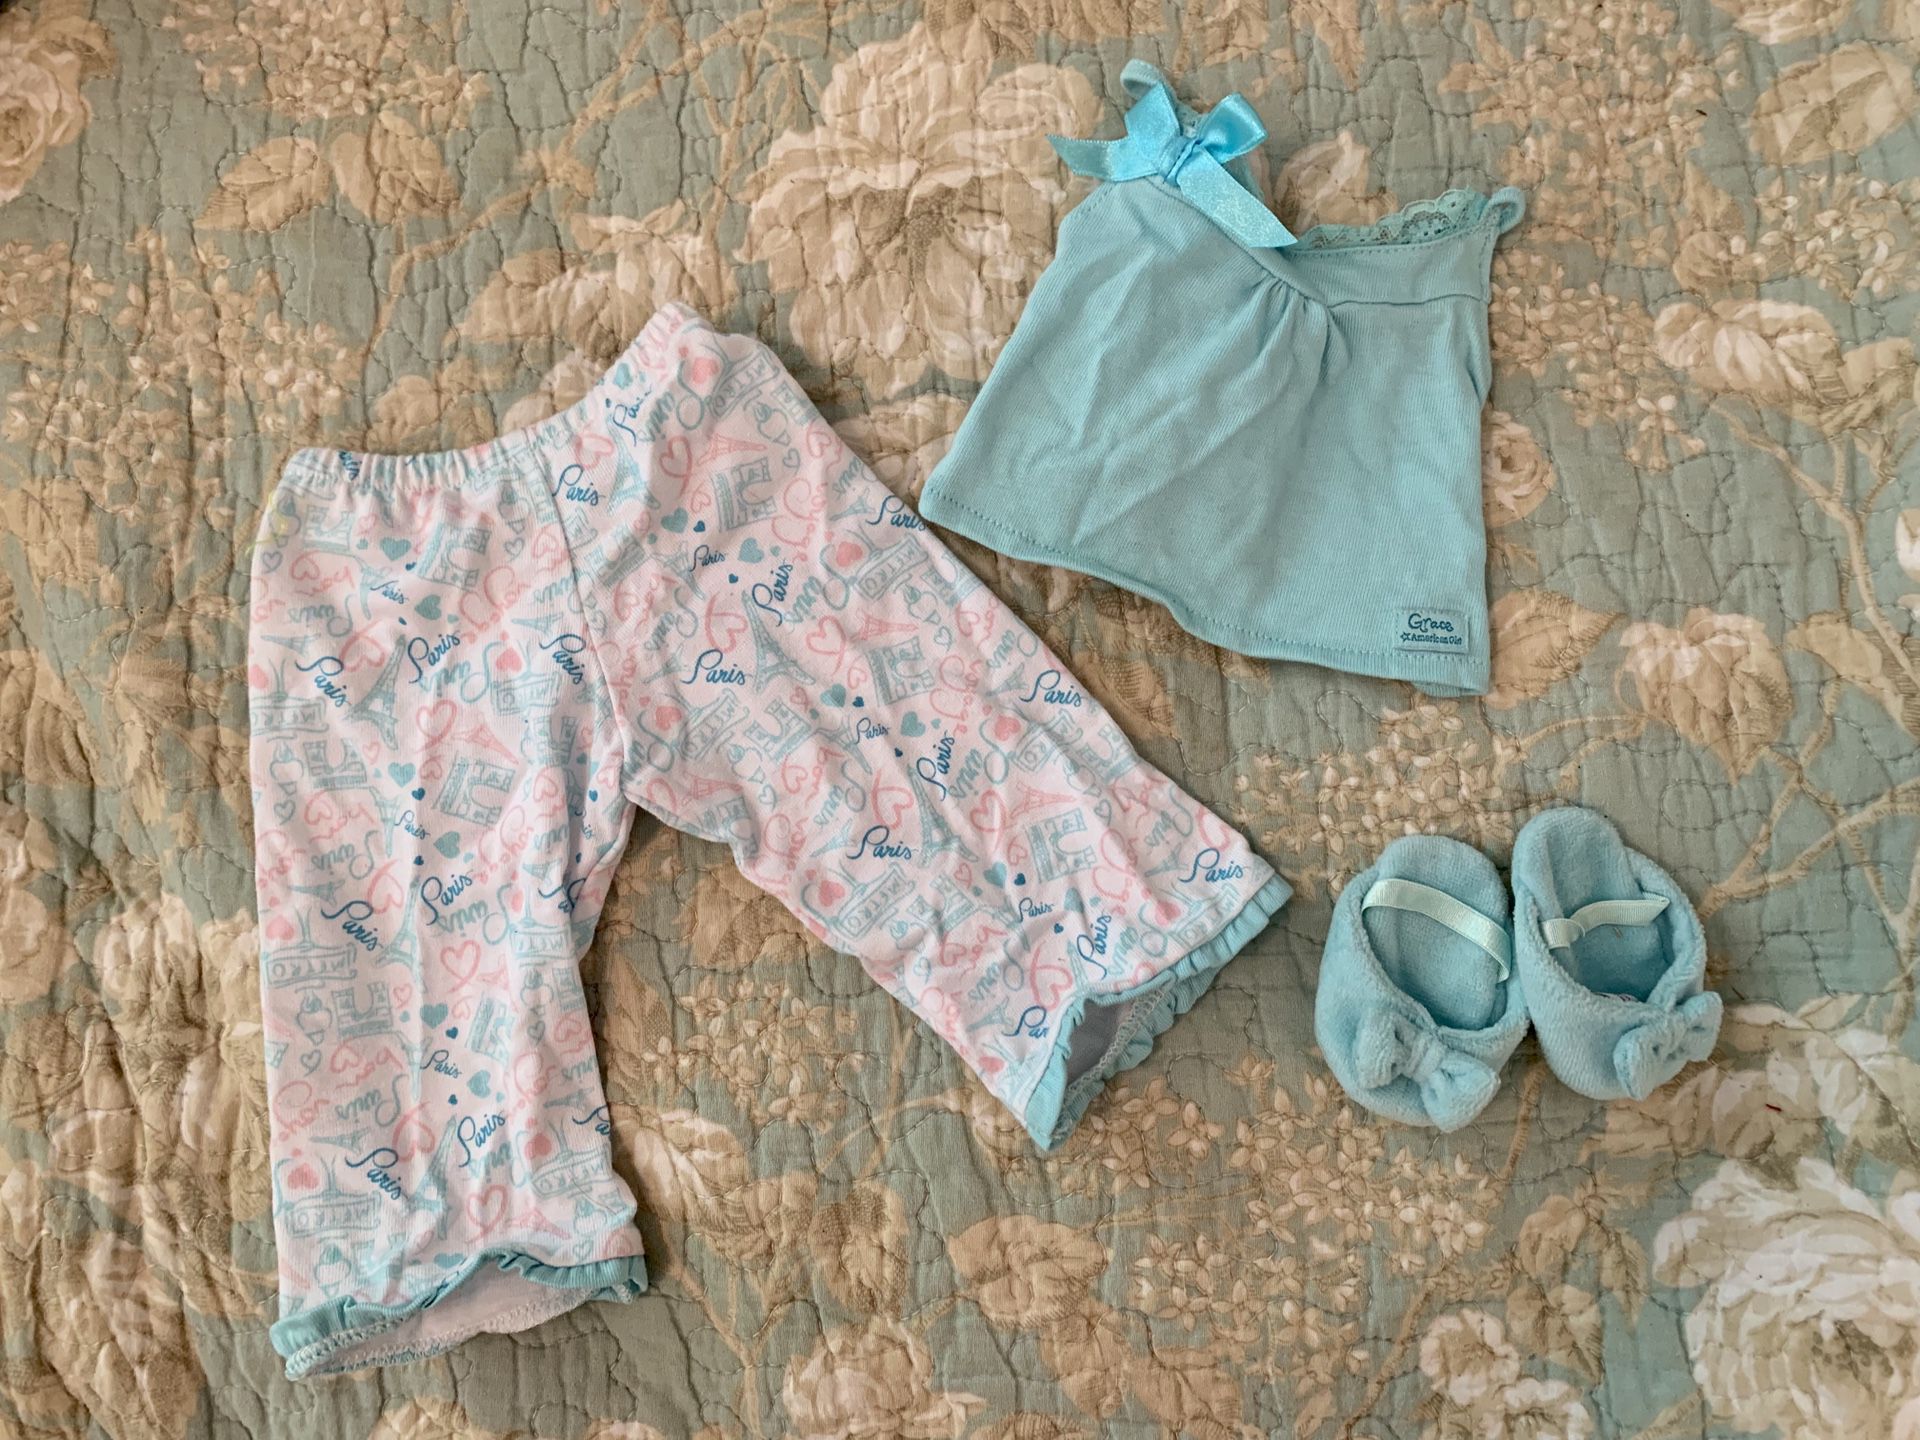 American Girl Doll “Grace Pj’s” Outfit